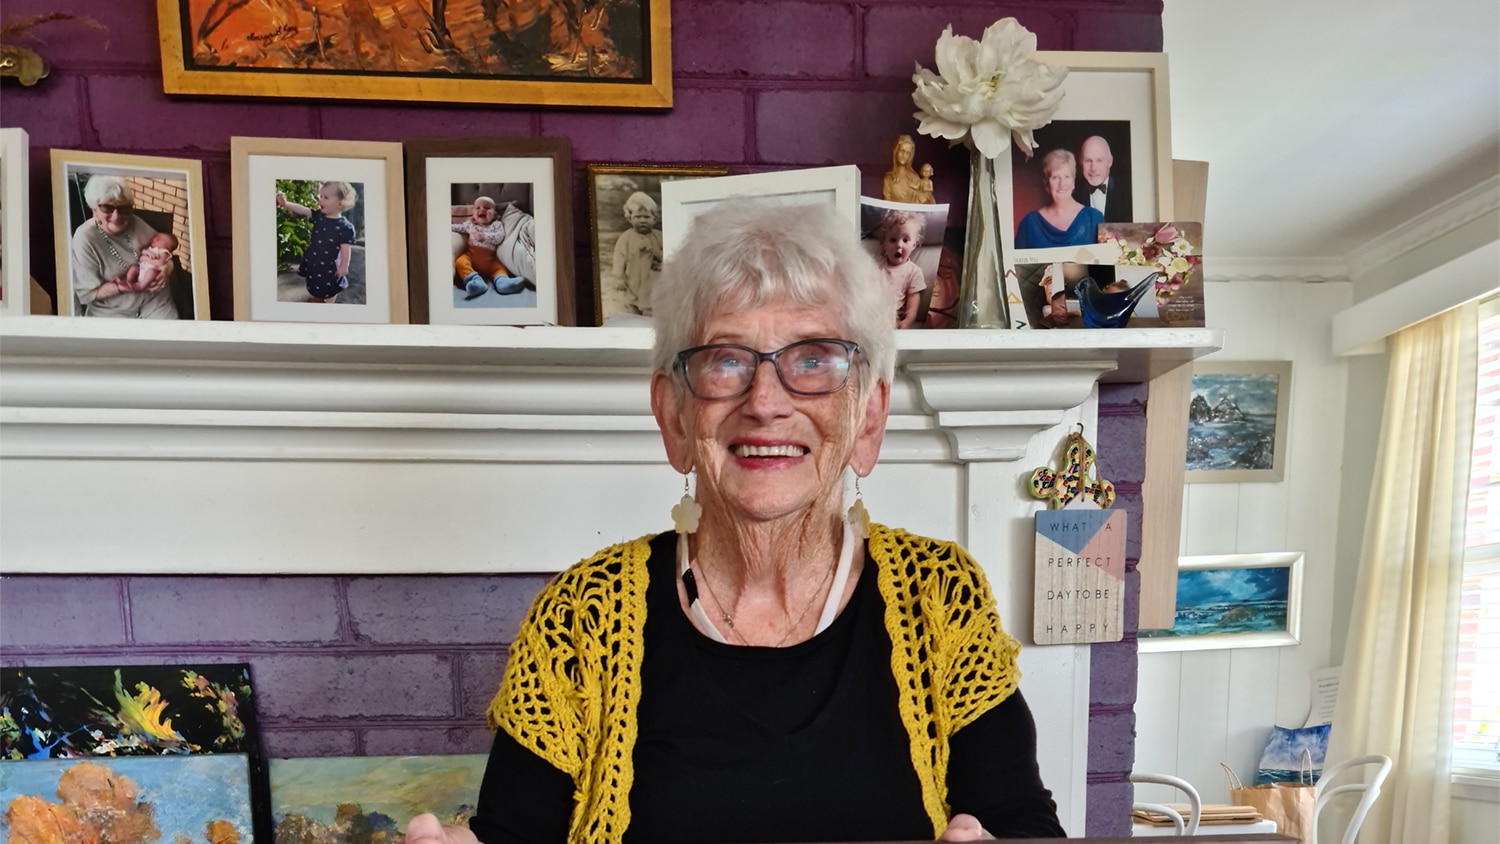 A lady with black top and yellow cardigan wearing glasses poses for a photo in her living room